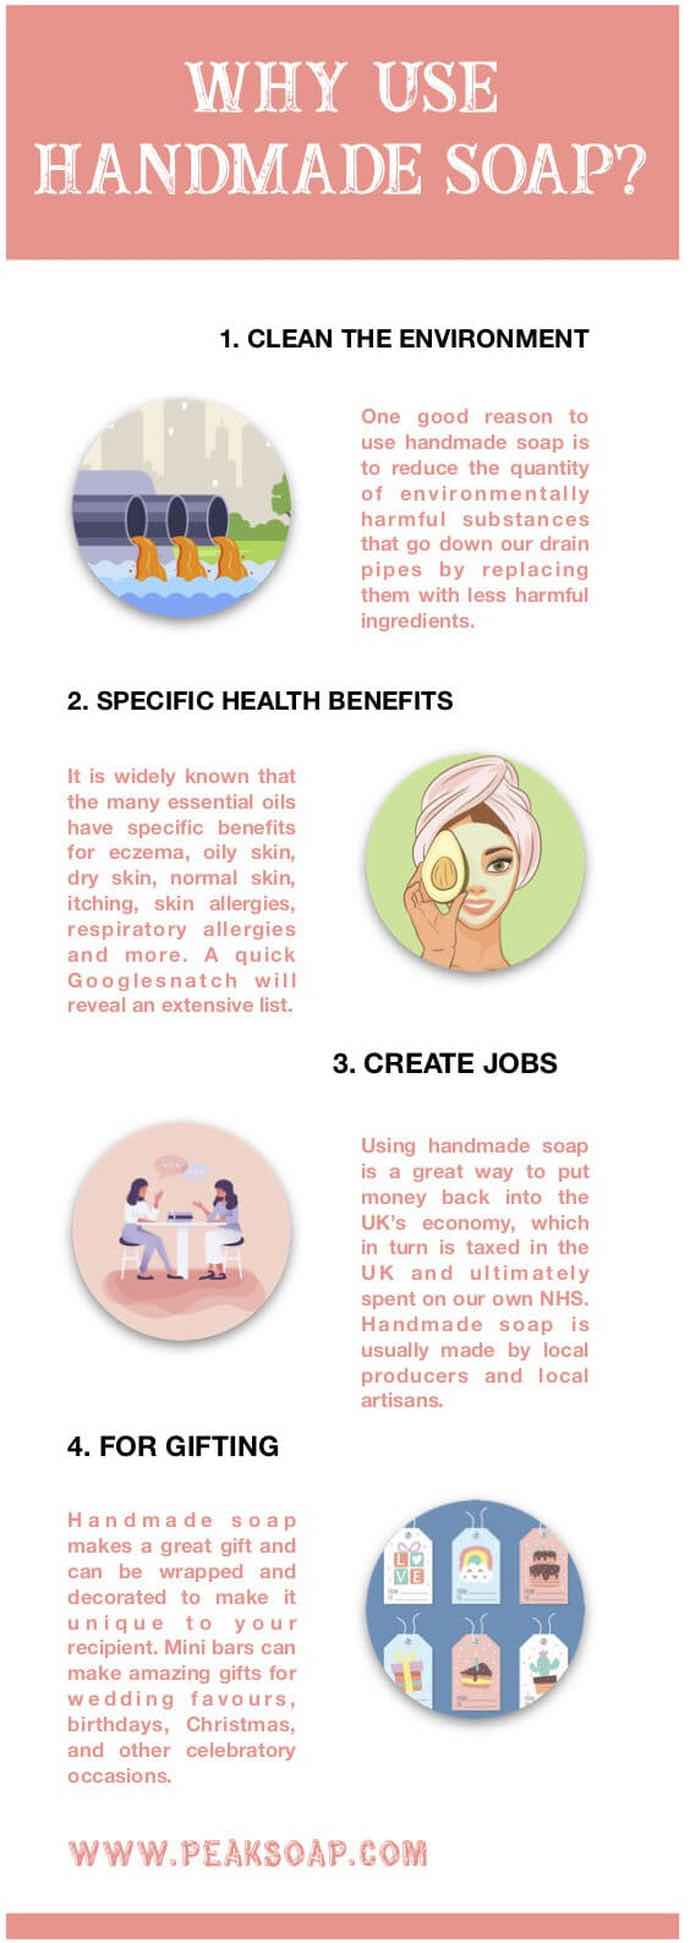 why use handmade soap? - INFOGRAPHIC